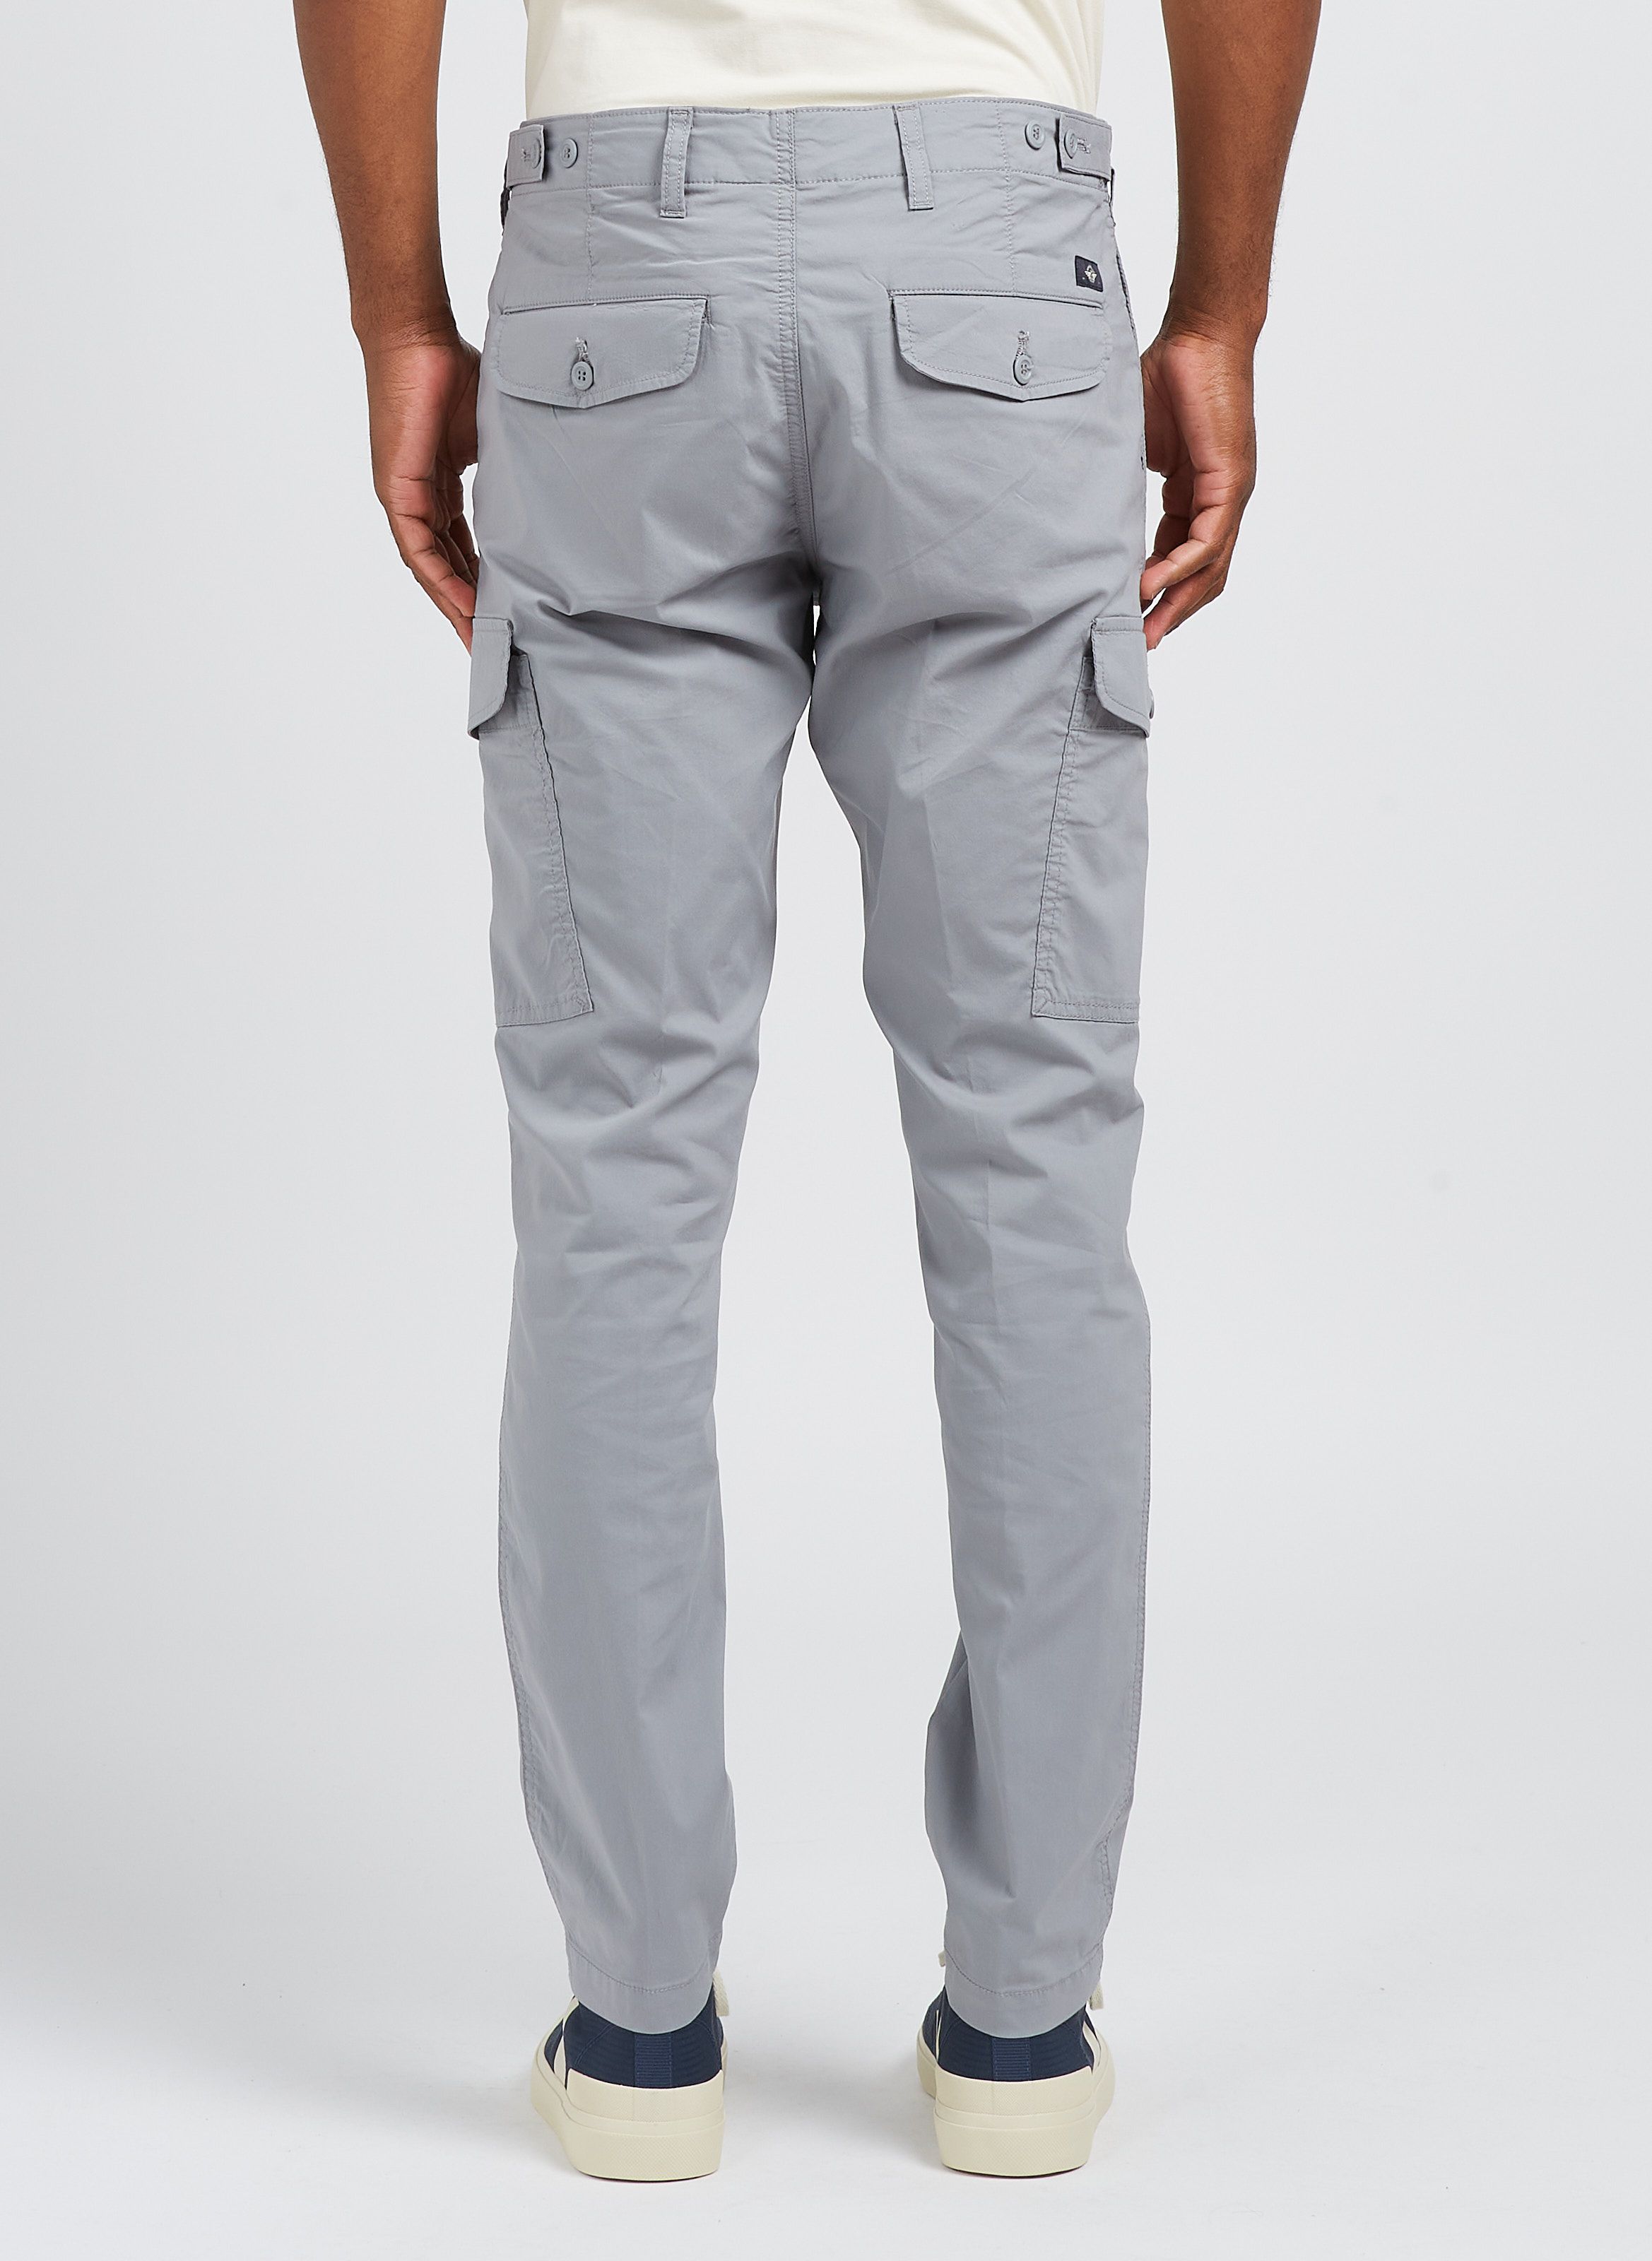 How to Wear Cargo Pants in 2023 | Dapper Confidential